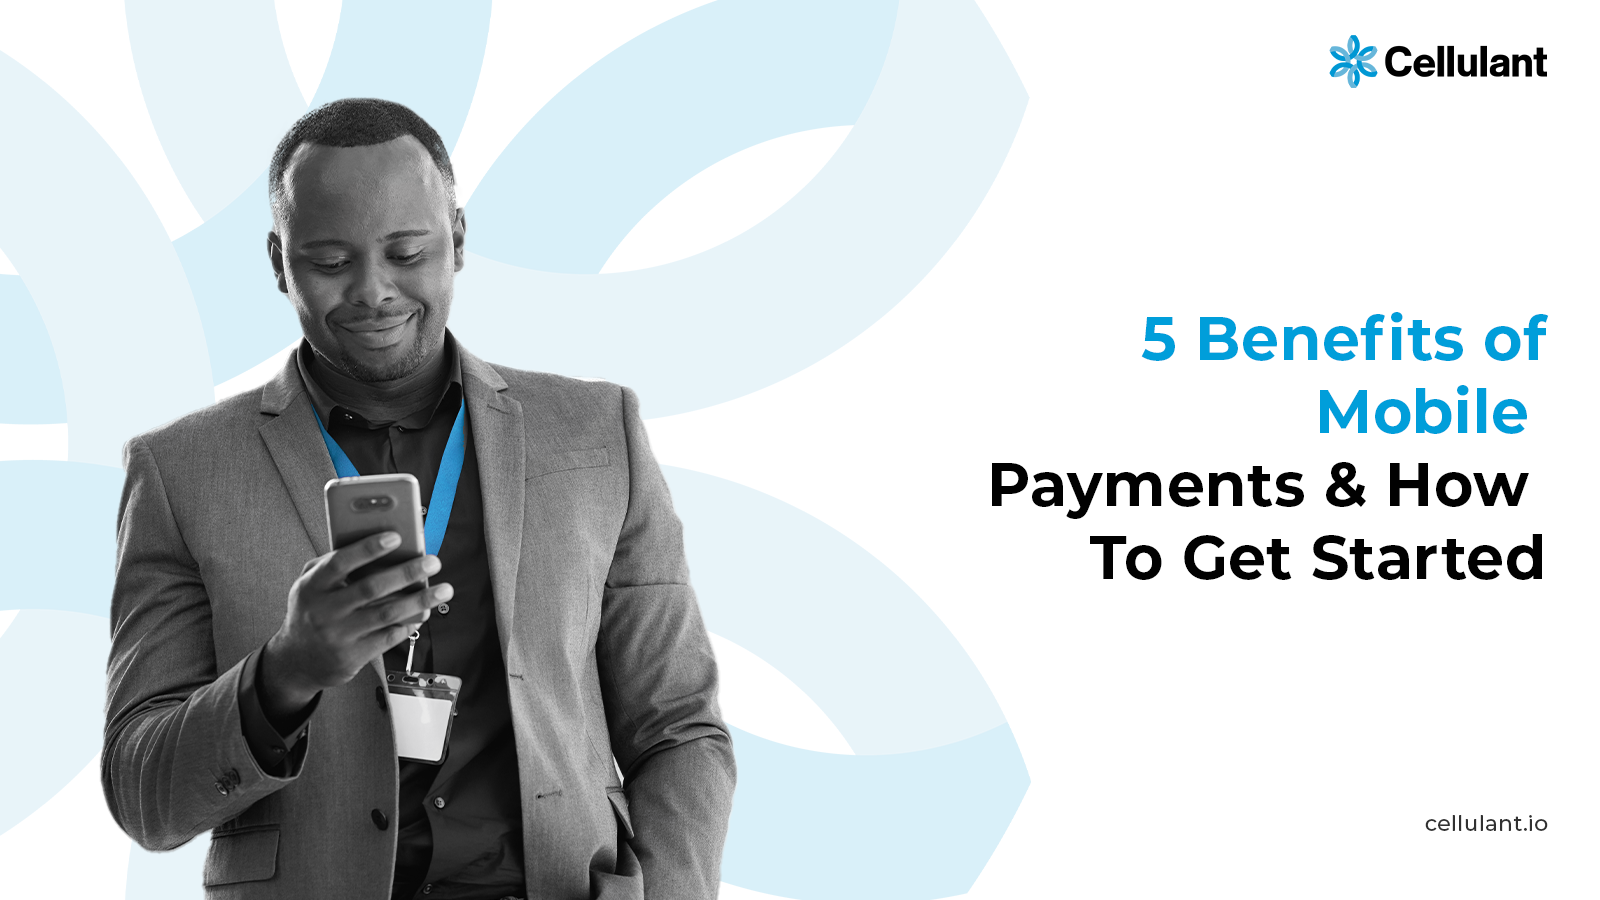 5 Benefits of Mobile Payments & How to Get Started